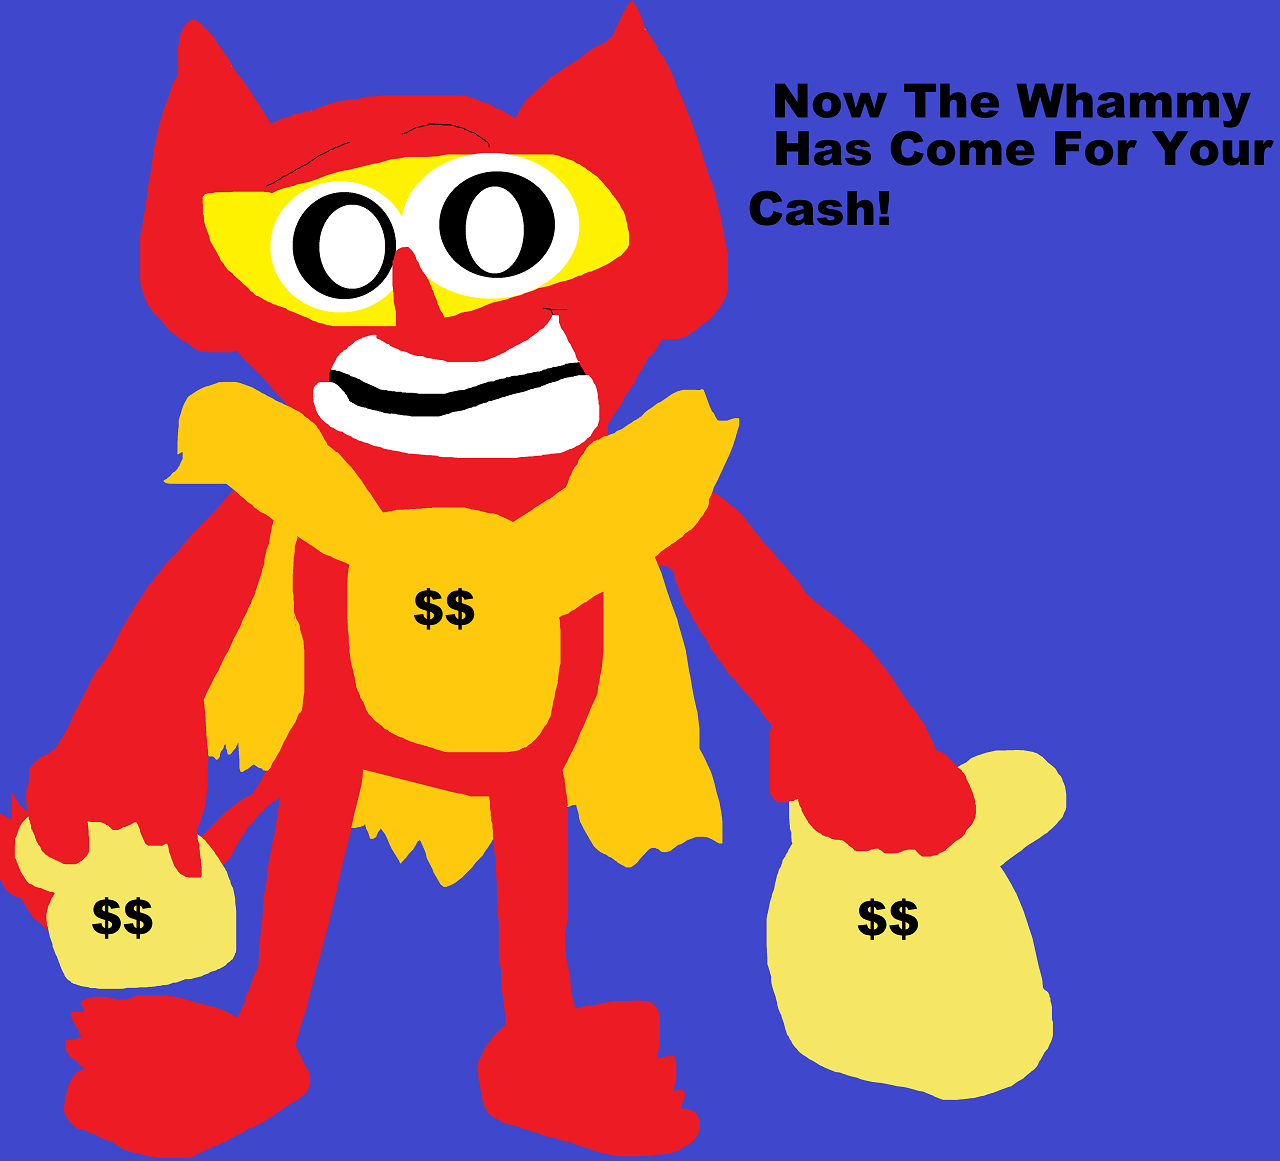 Now The Whammy Has Come For Your Cash by Falconlobo